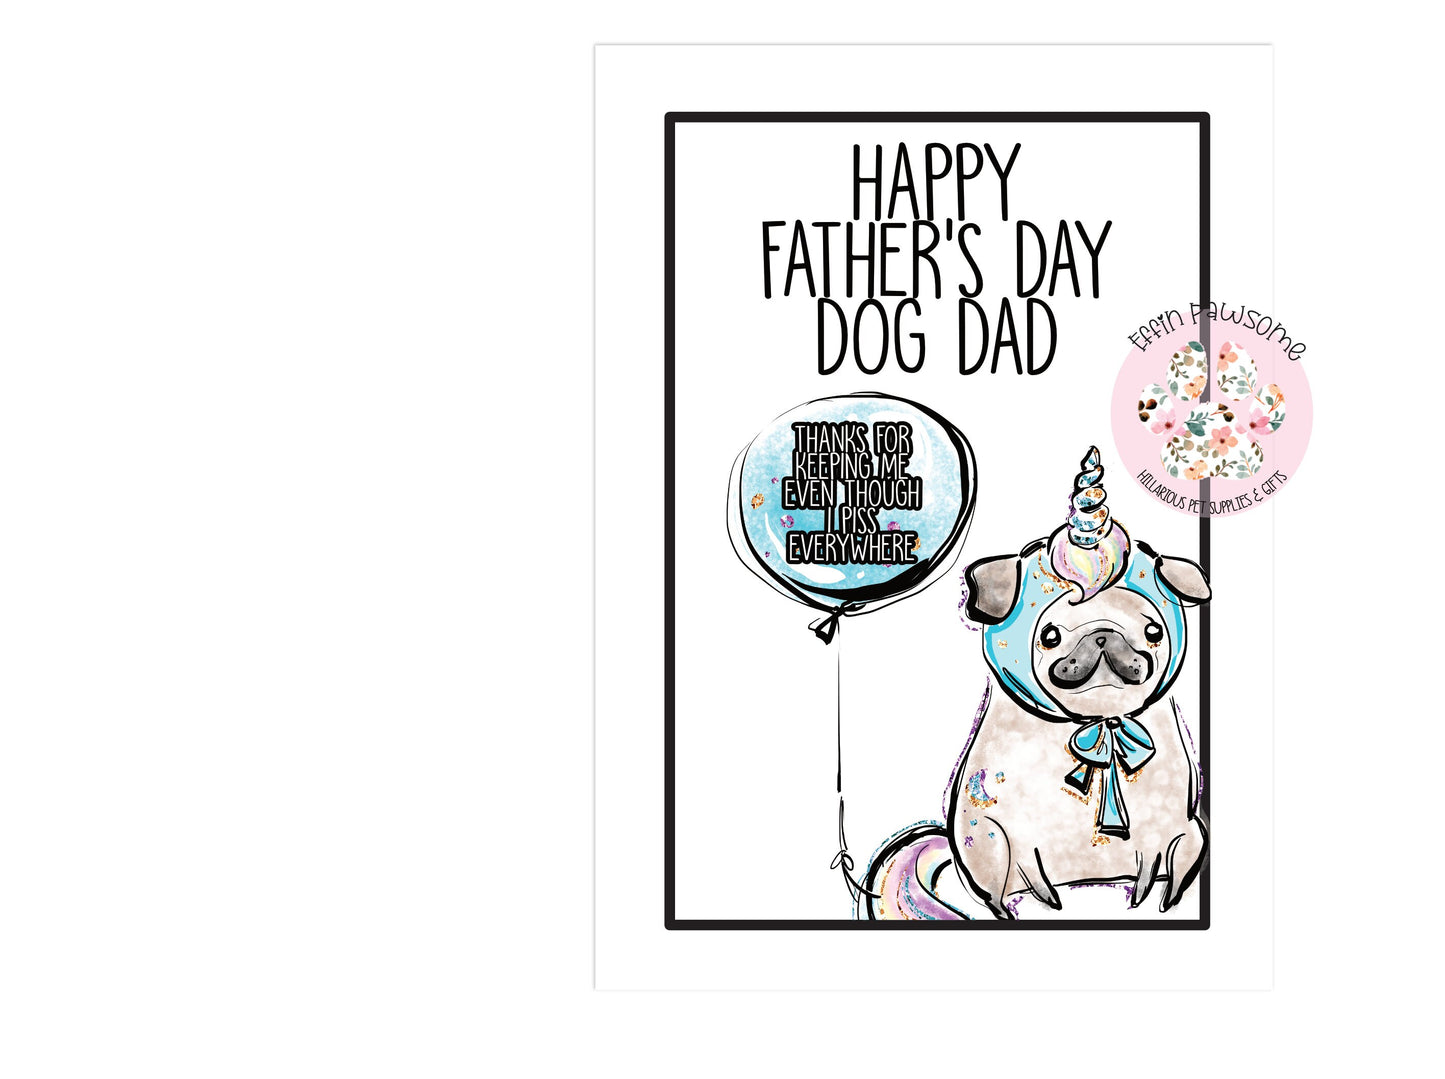 Piss Everywhere Pug Card | Personalised Gift | Dog Dad | Mother's Day Card | Pet Gift | Mum | Rude Card | Greetings Card | Mature | Dad Card